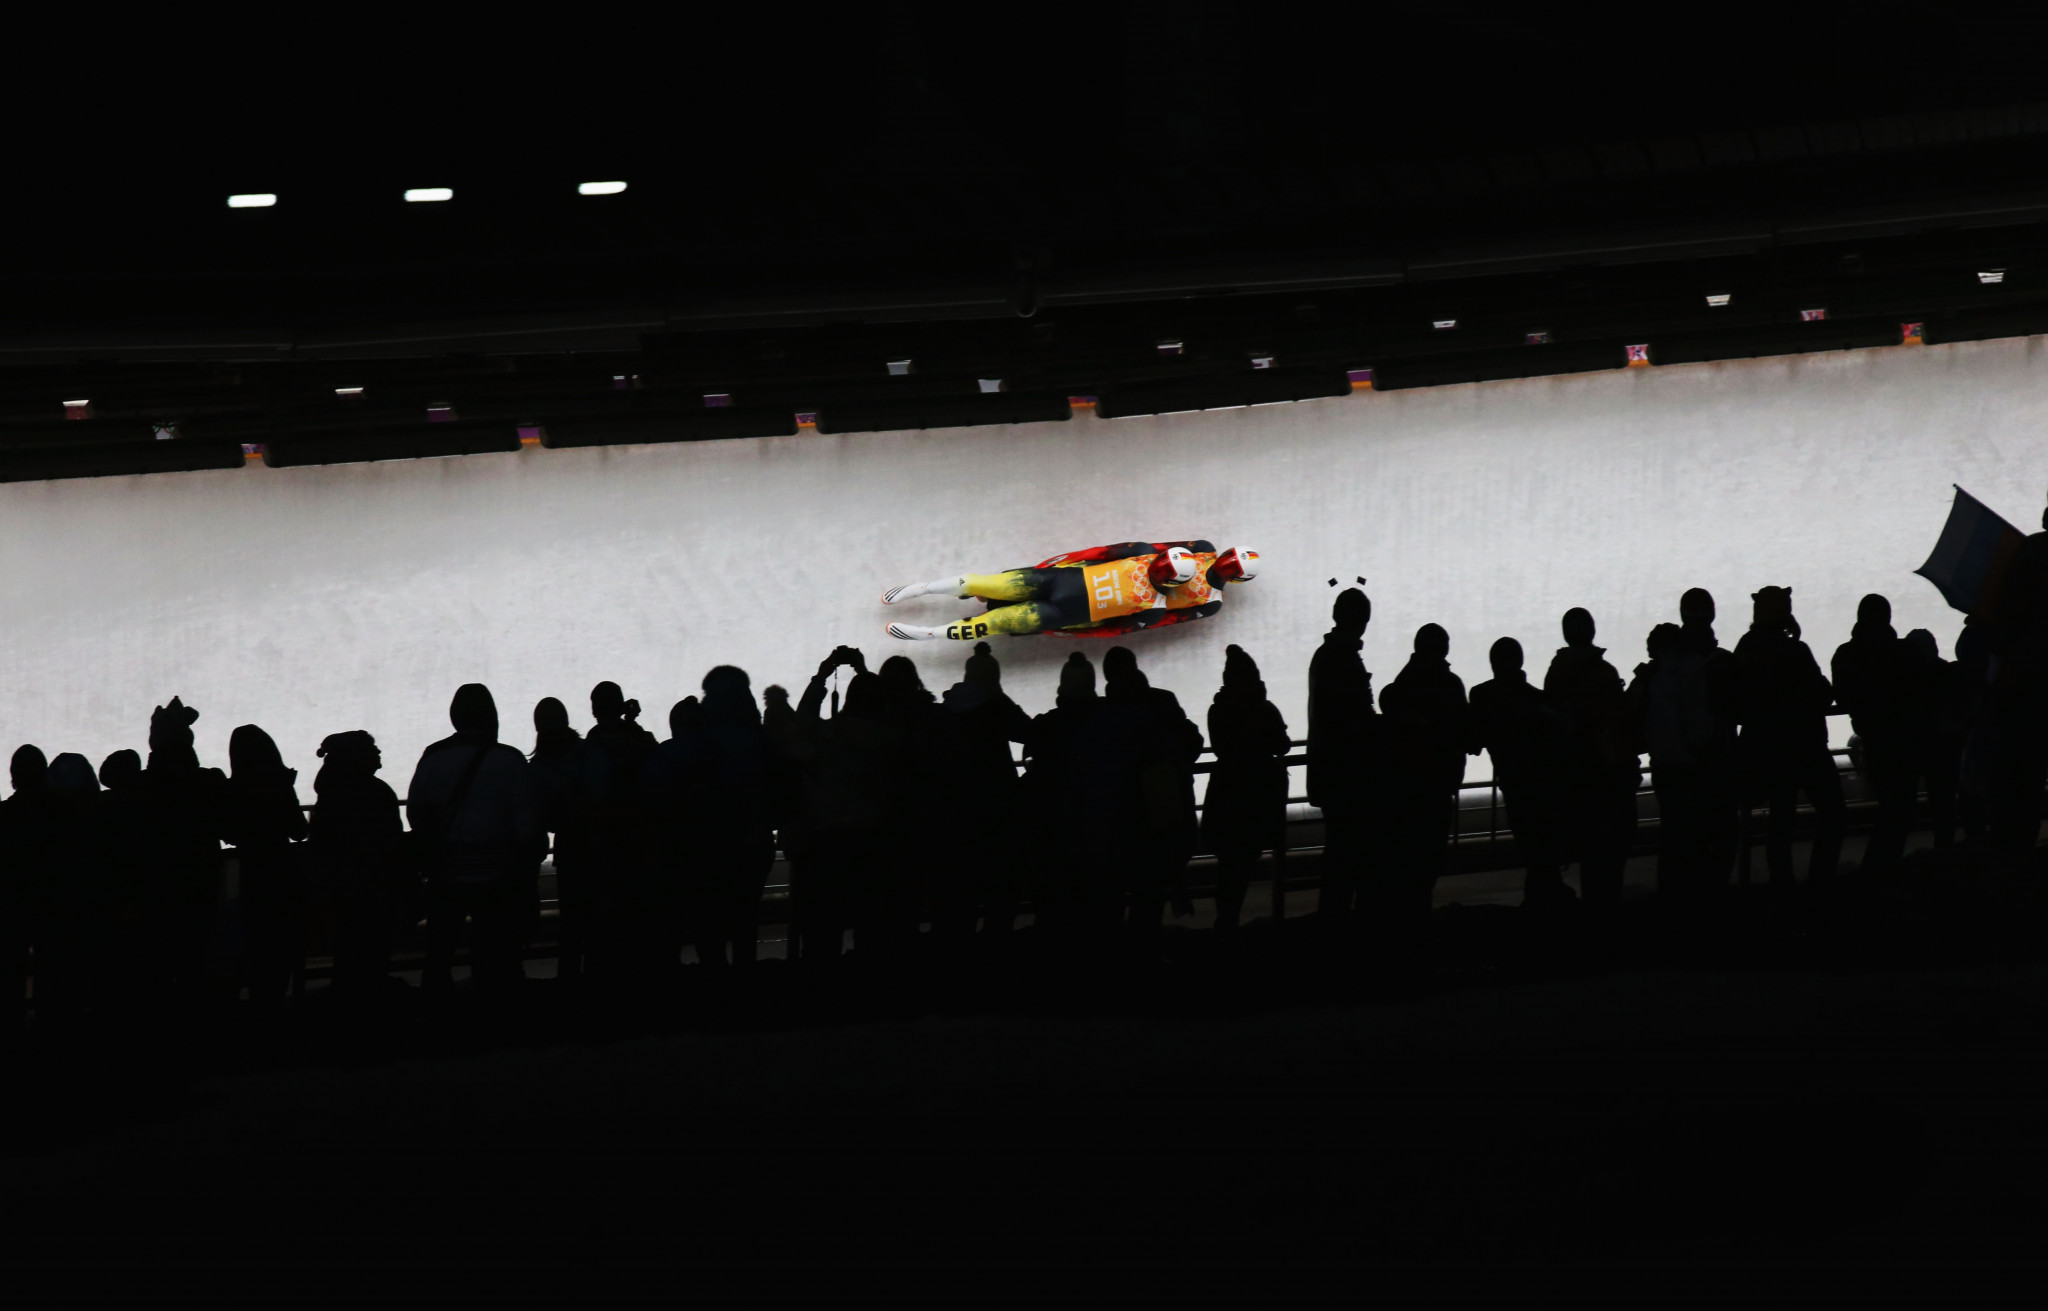 Preparations for Luge World Championships in Sochi unaffected by WADA ruling, FIL claim